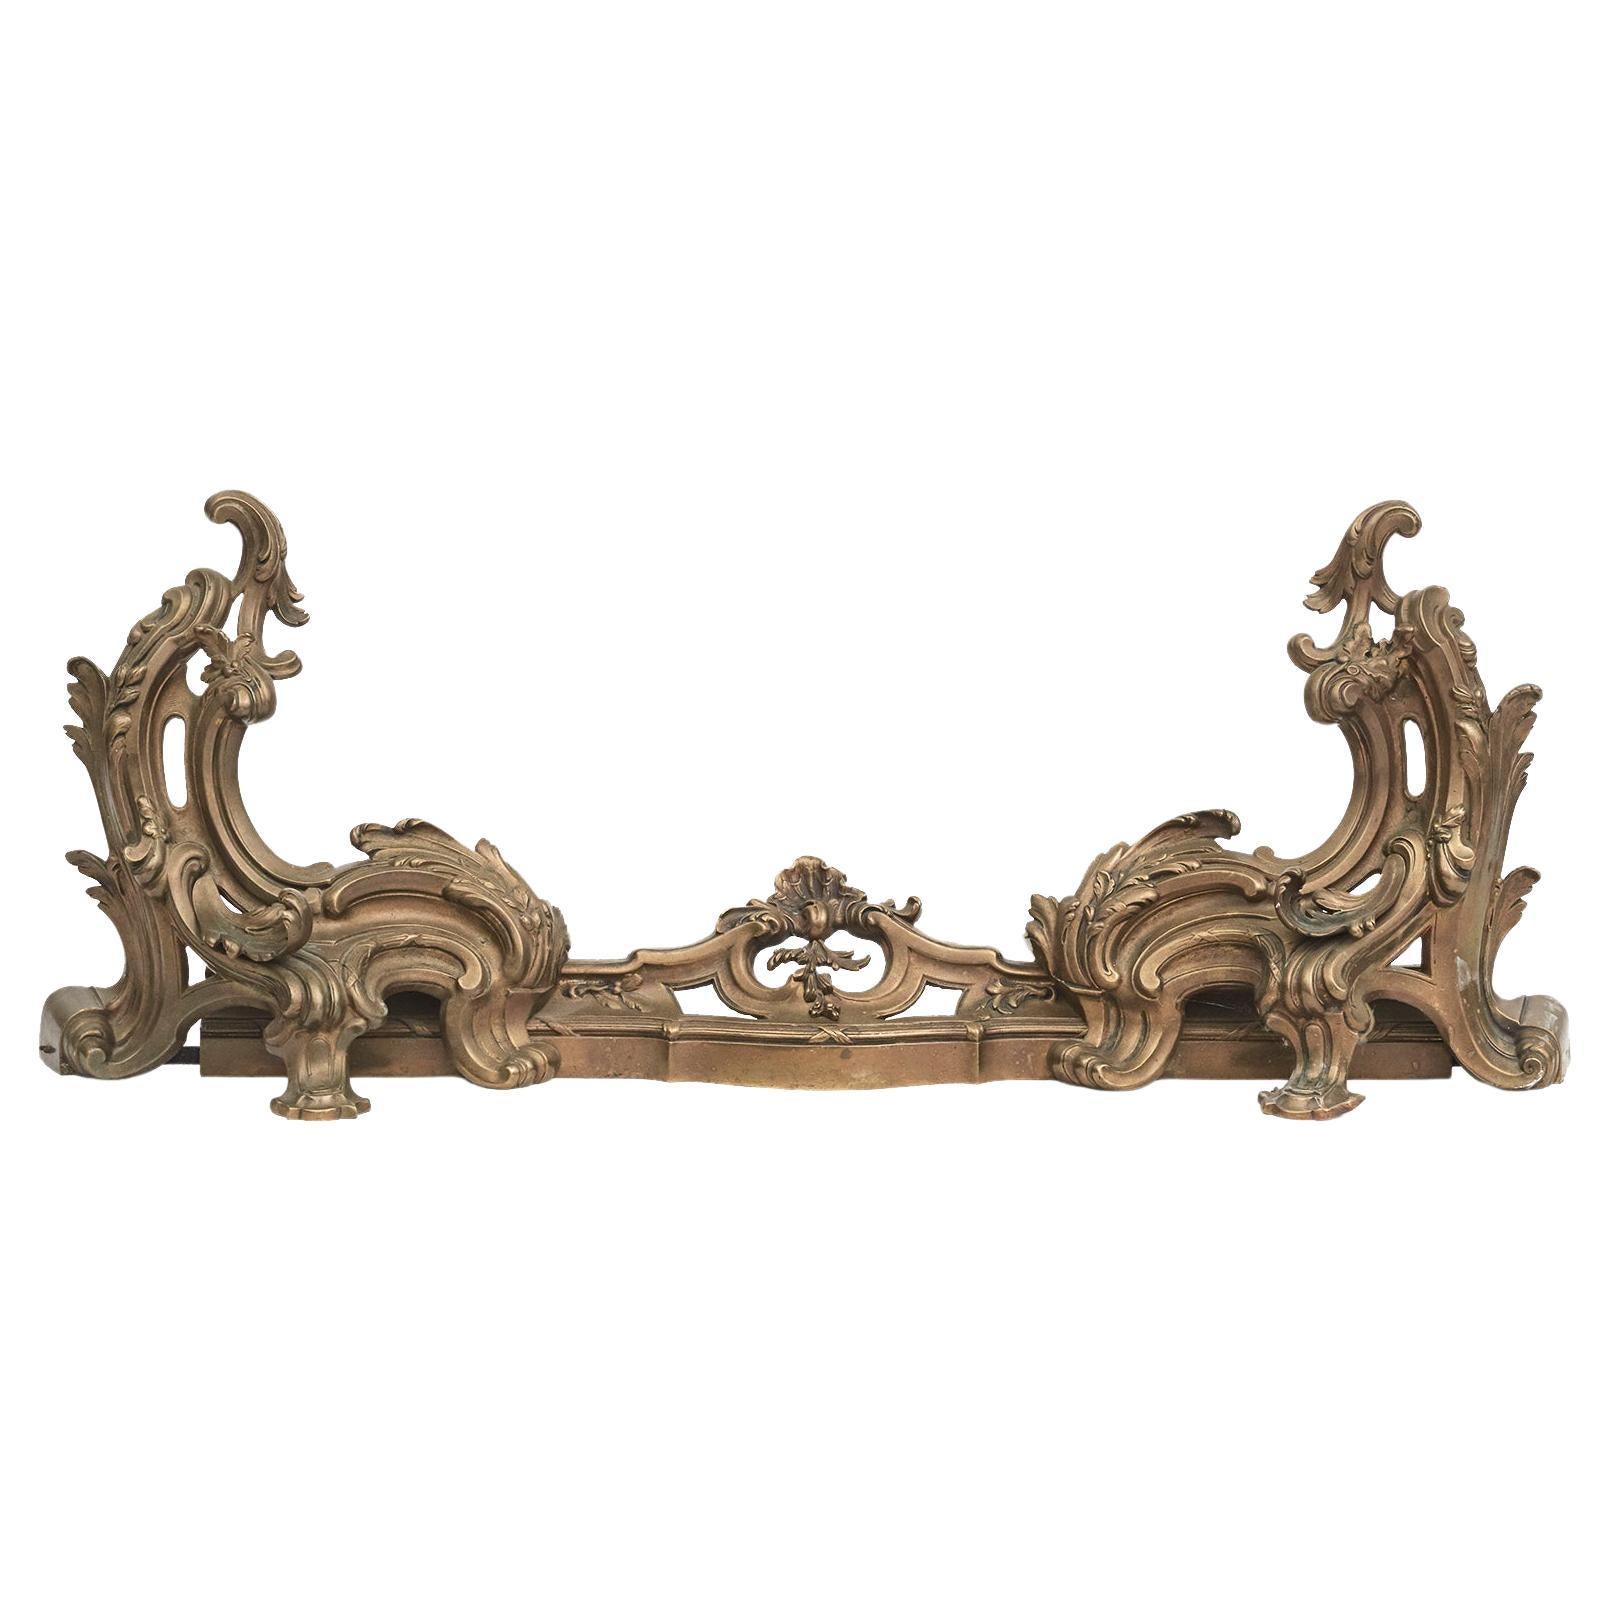 Beautiful French antique bronze fireplace fender in the style of Rococo.
The fender features a relief rail which is decorated with stylized scrolling acanthus leaves and ornament decorations, which are reminiscent of the Rococo style of design.